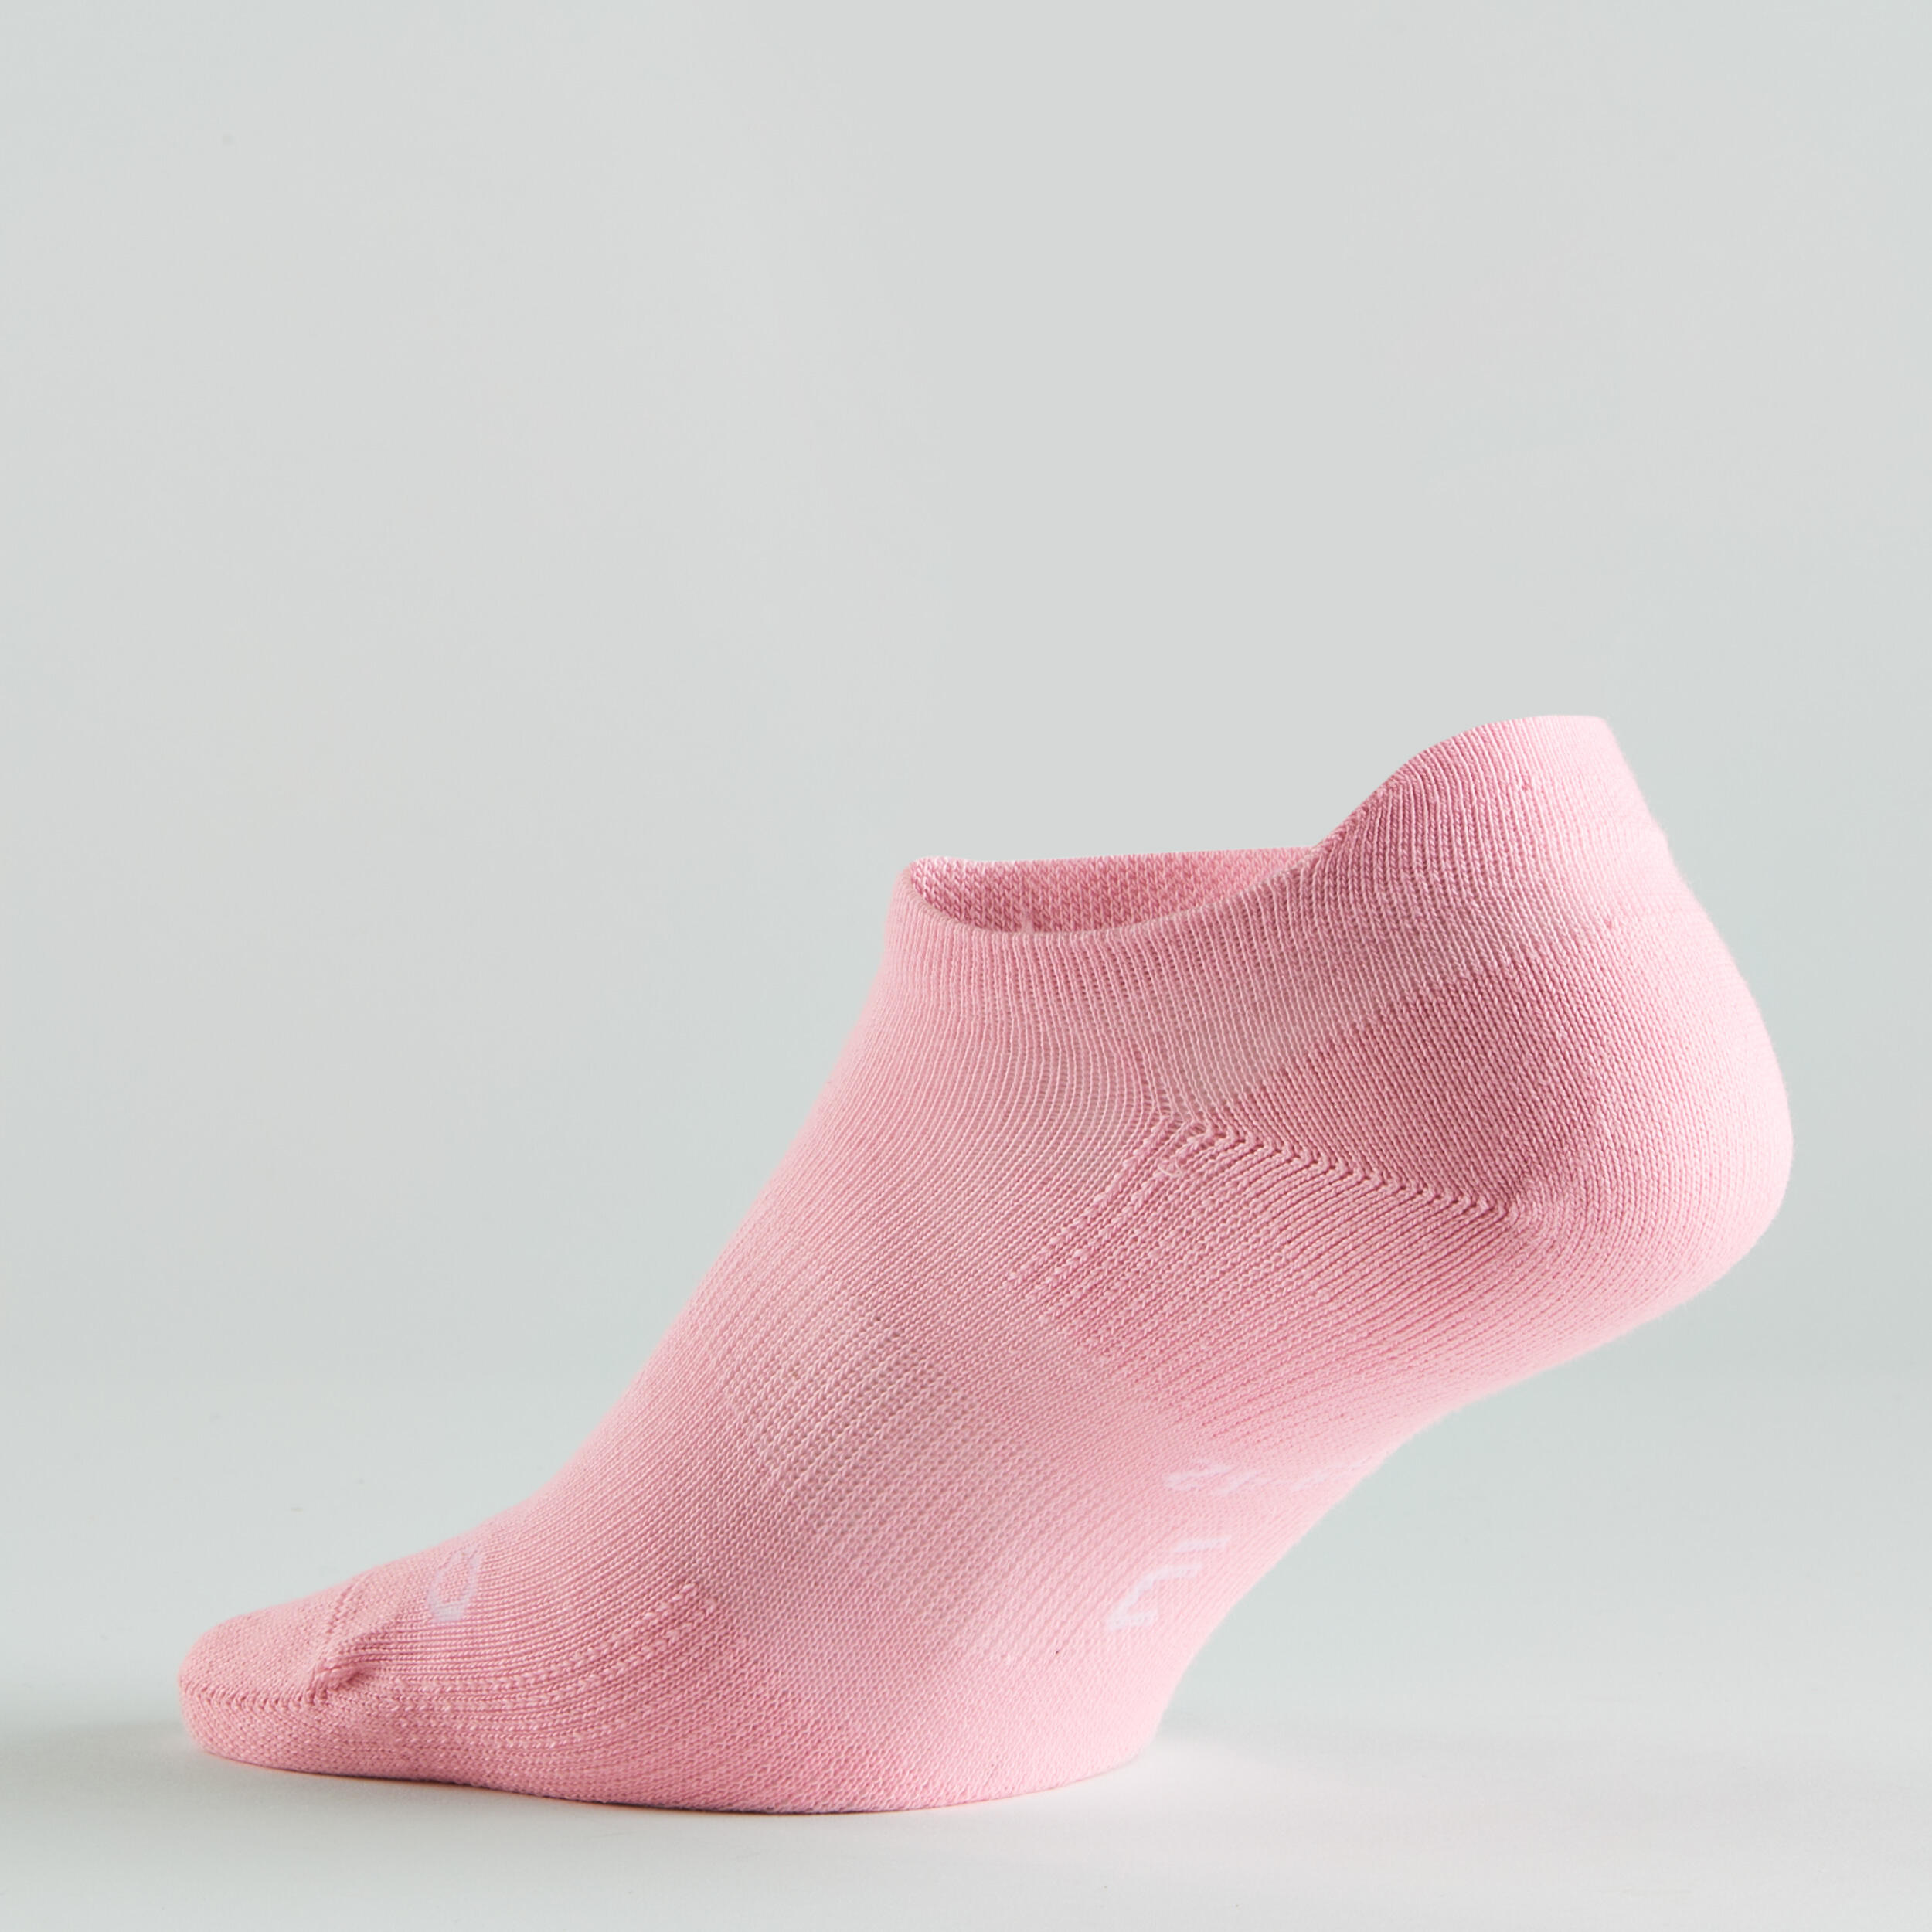 Low Sports Socks RS 160 Tri-Pack - Pink/White/China Blue 11/14